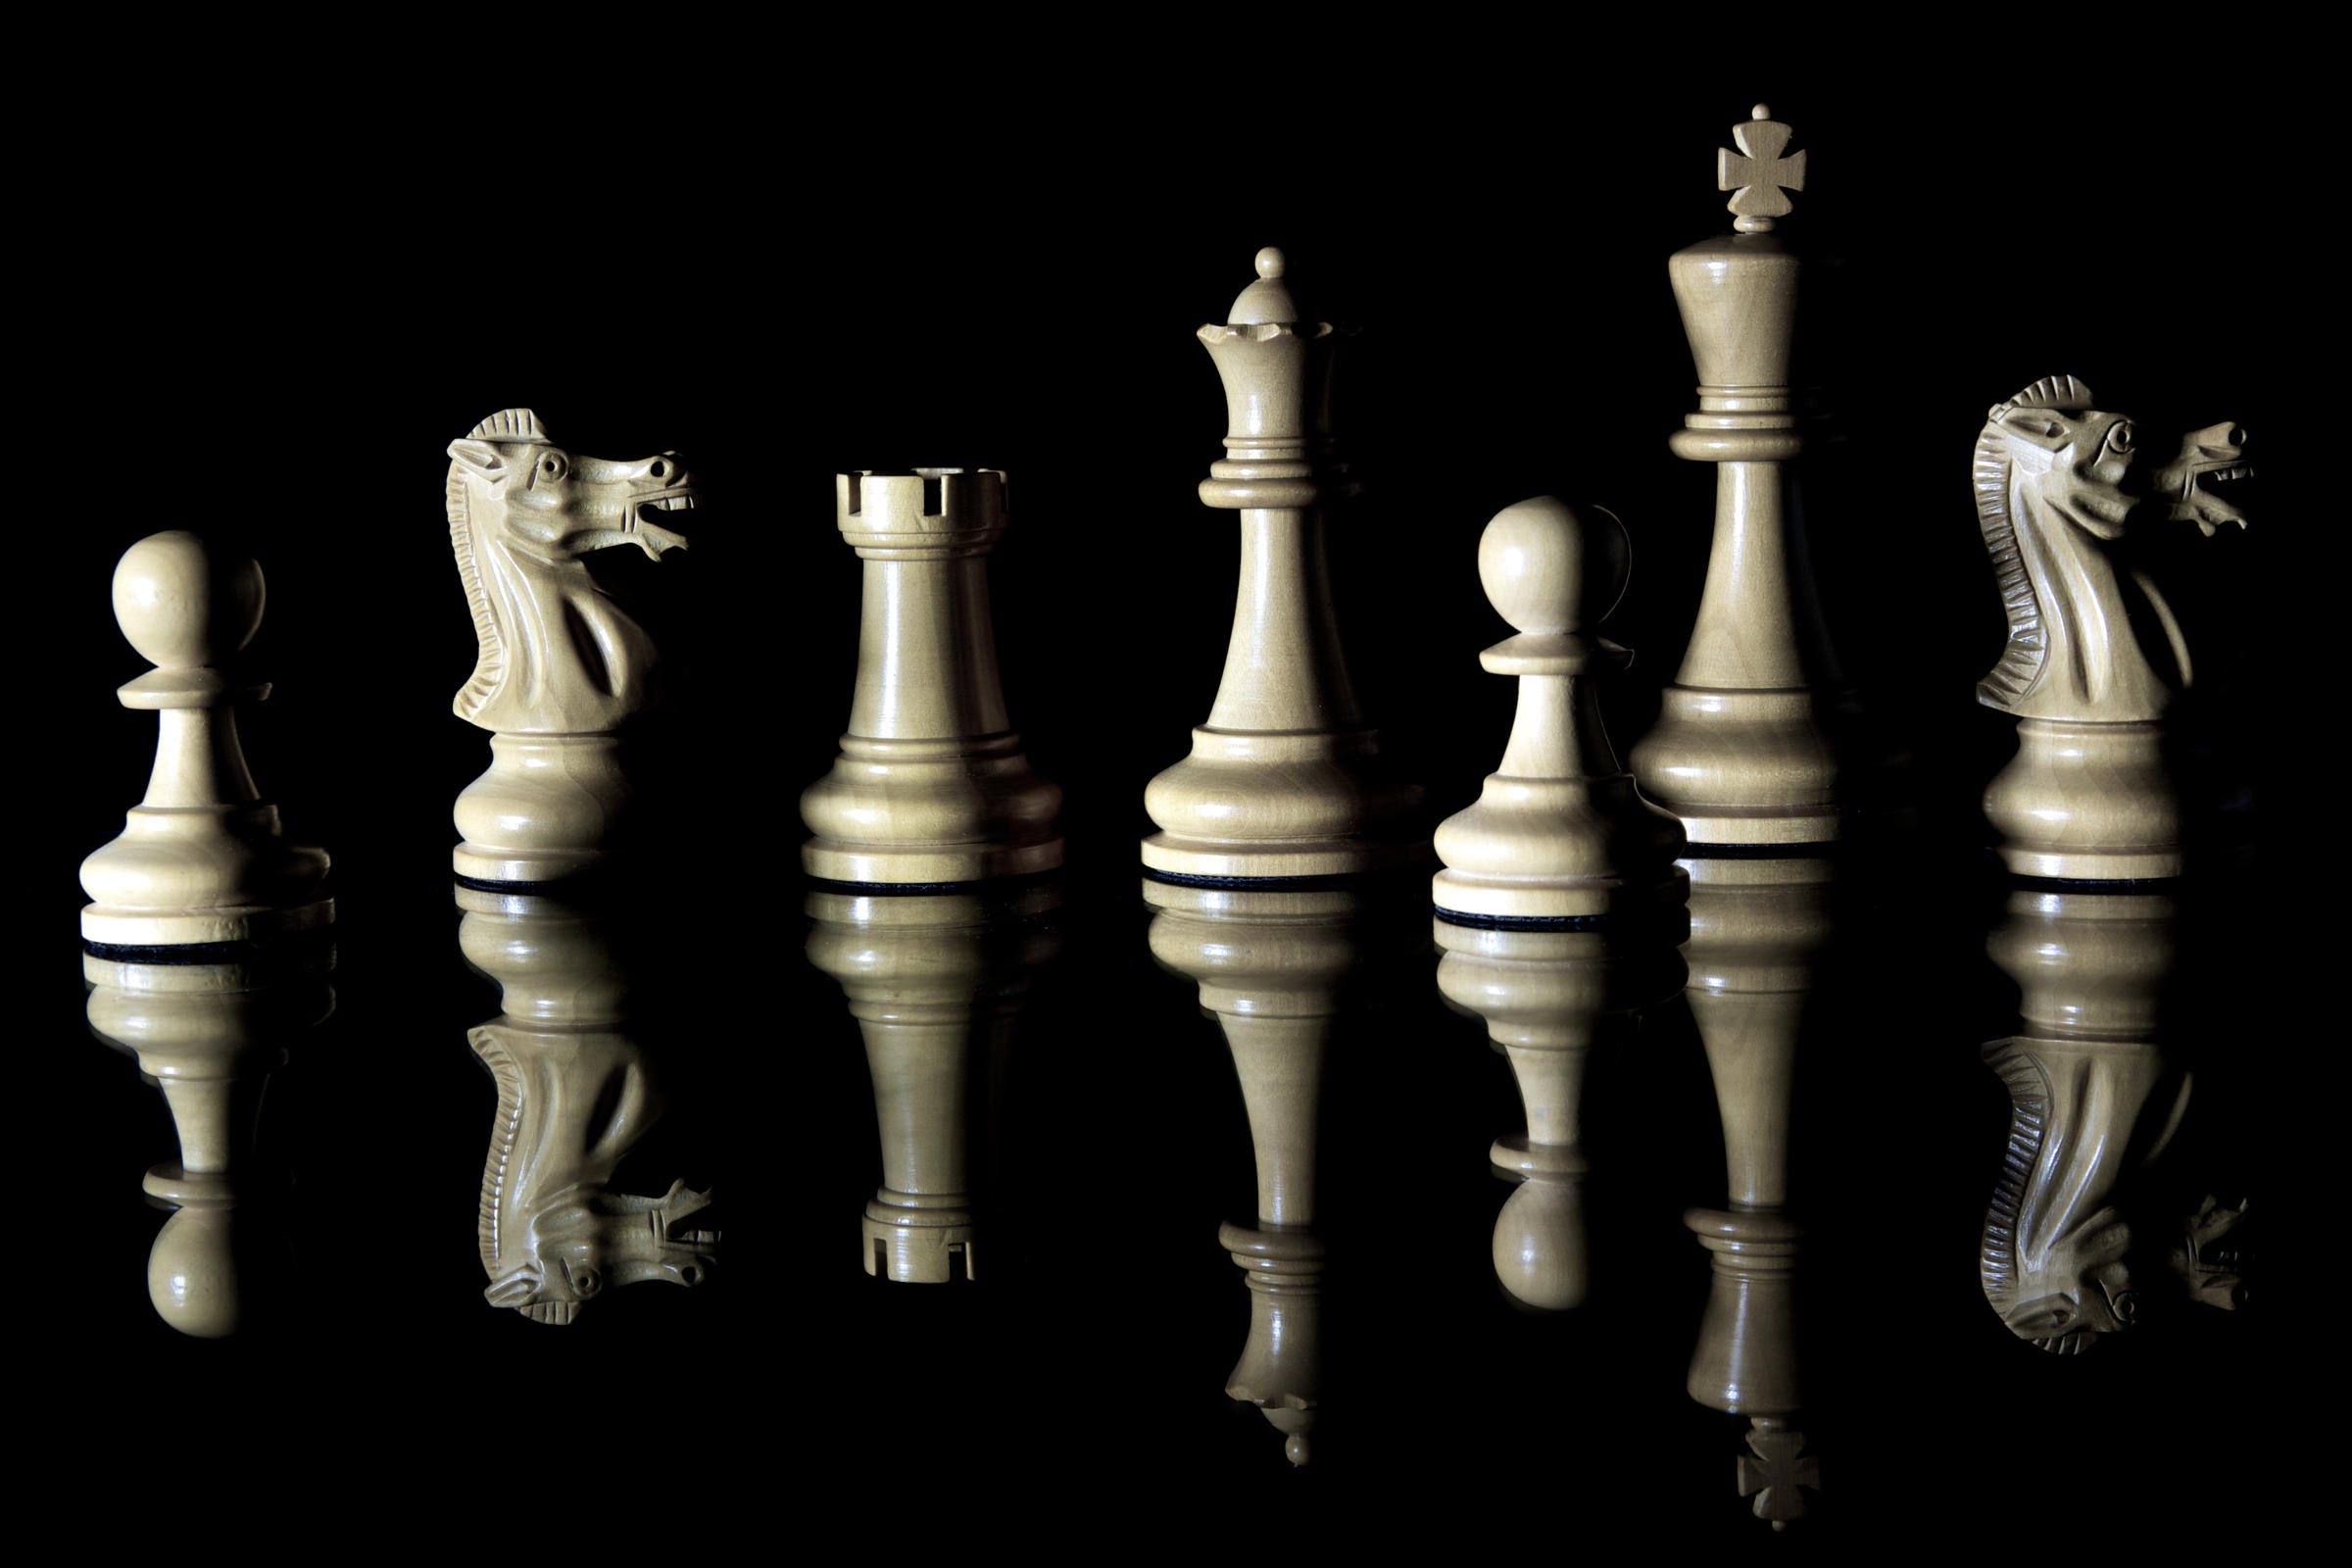 chess pieces names and pictures